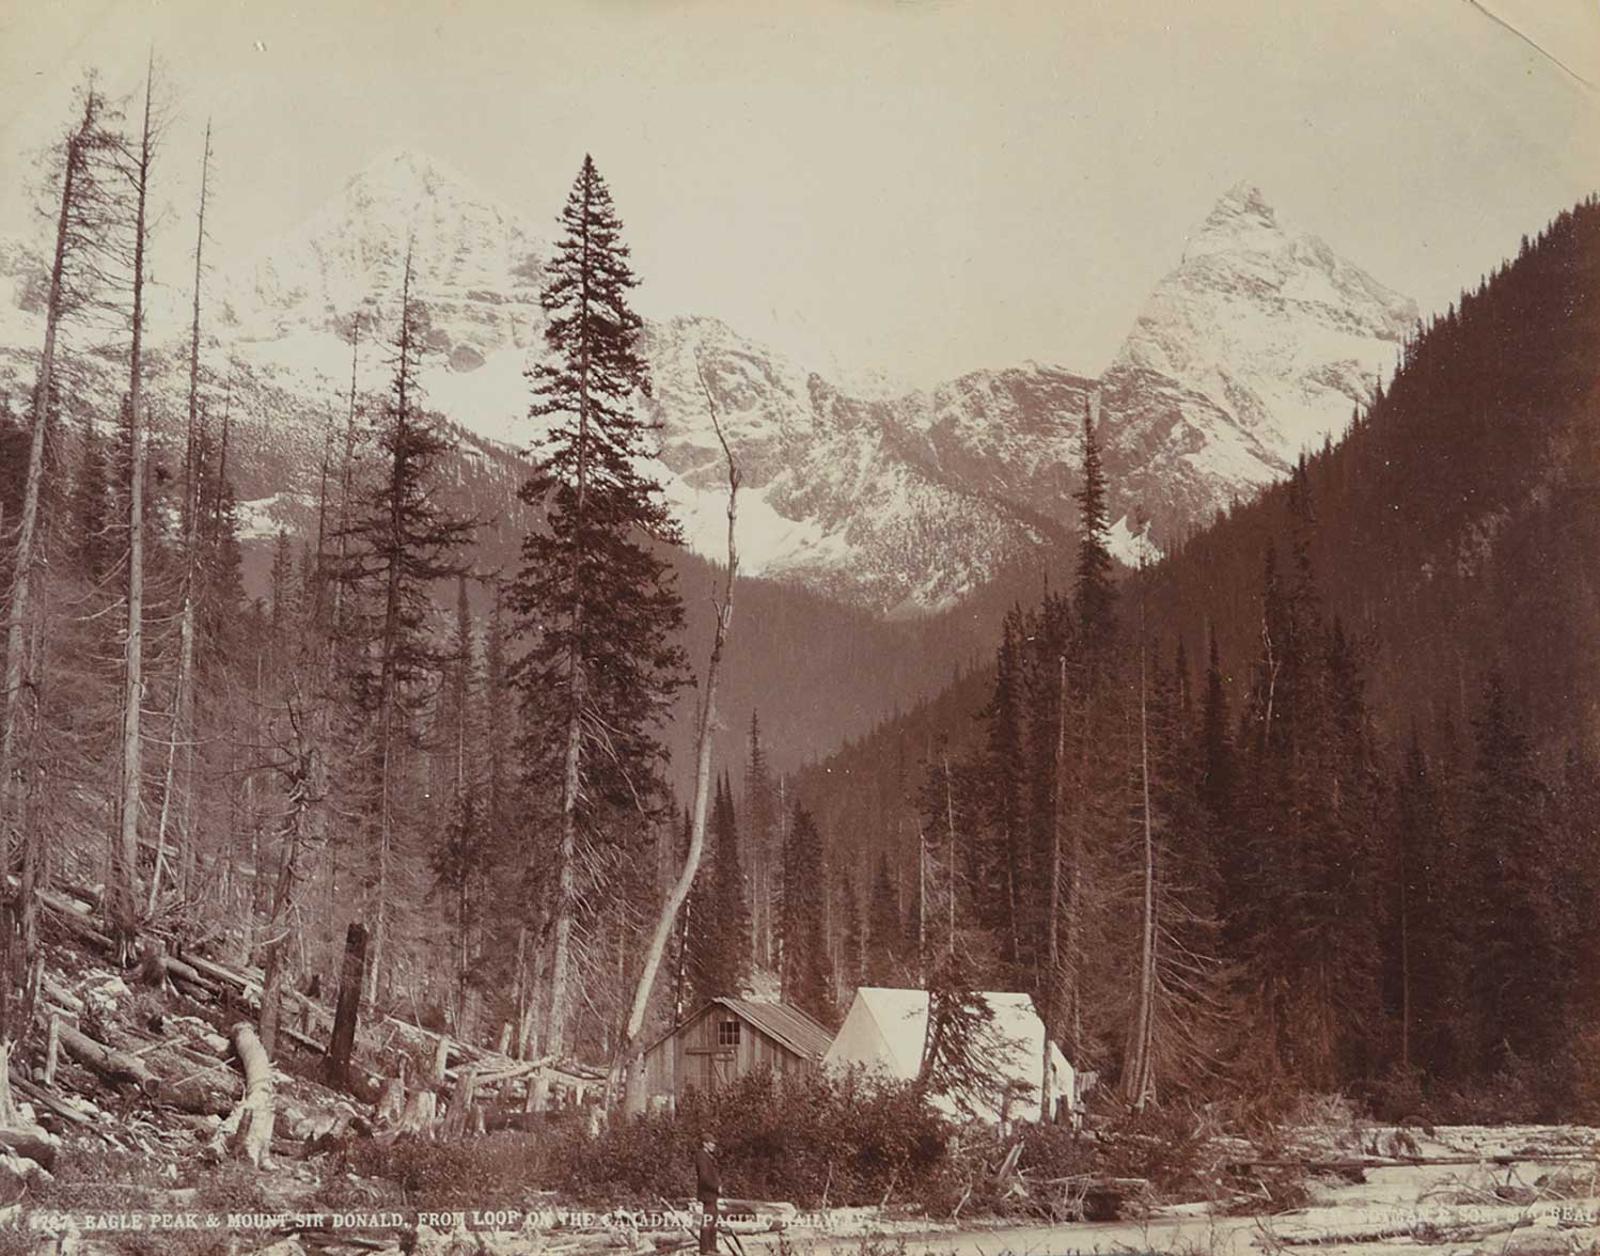 William Notman (1826-1891) - 1727 - Eagle Peak and Mount Sir Donald from Loop